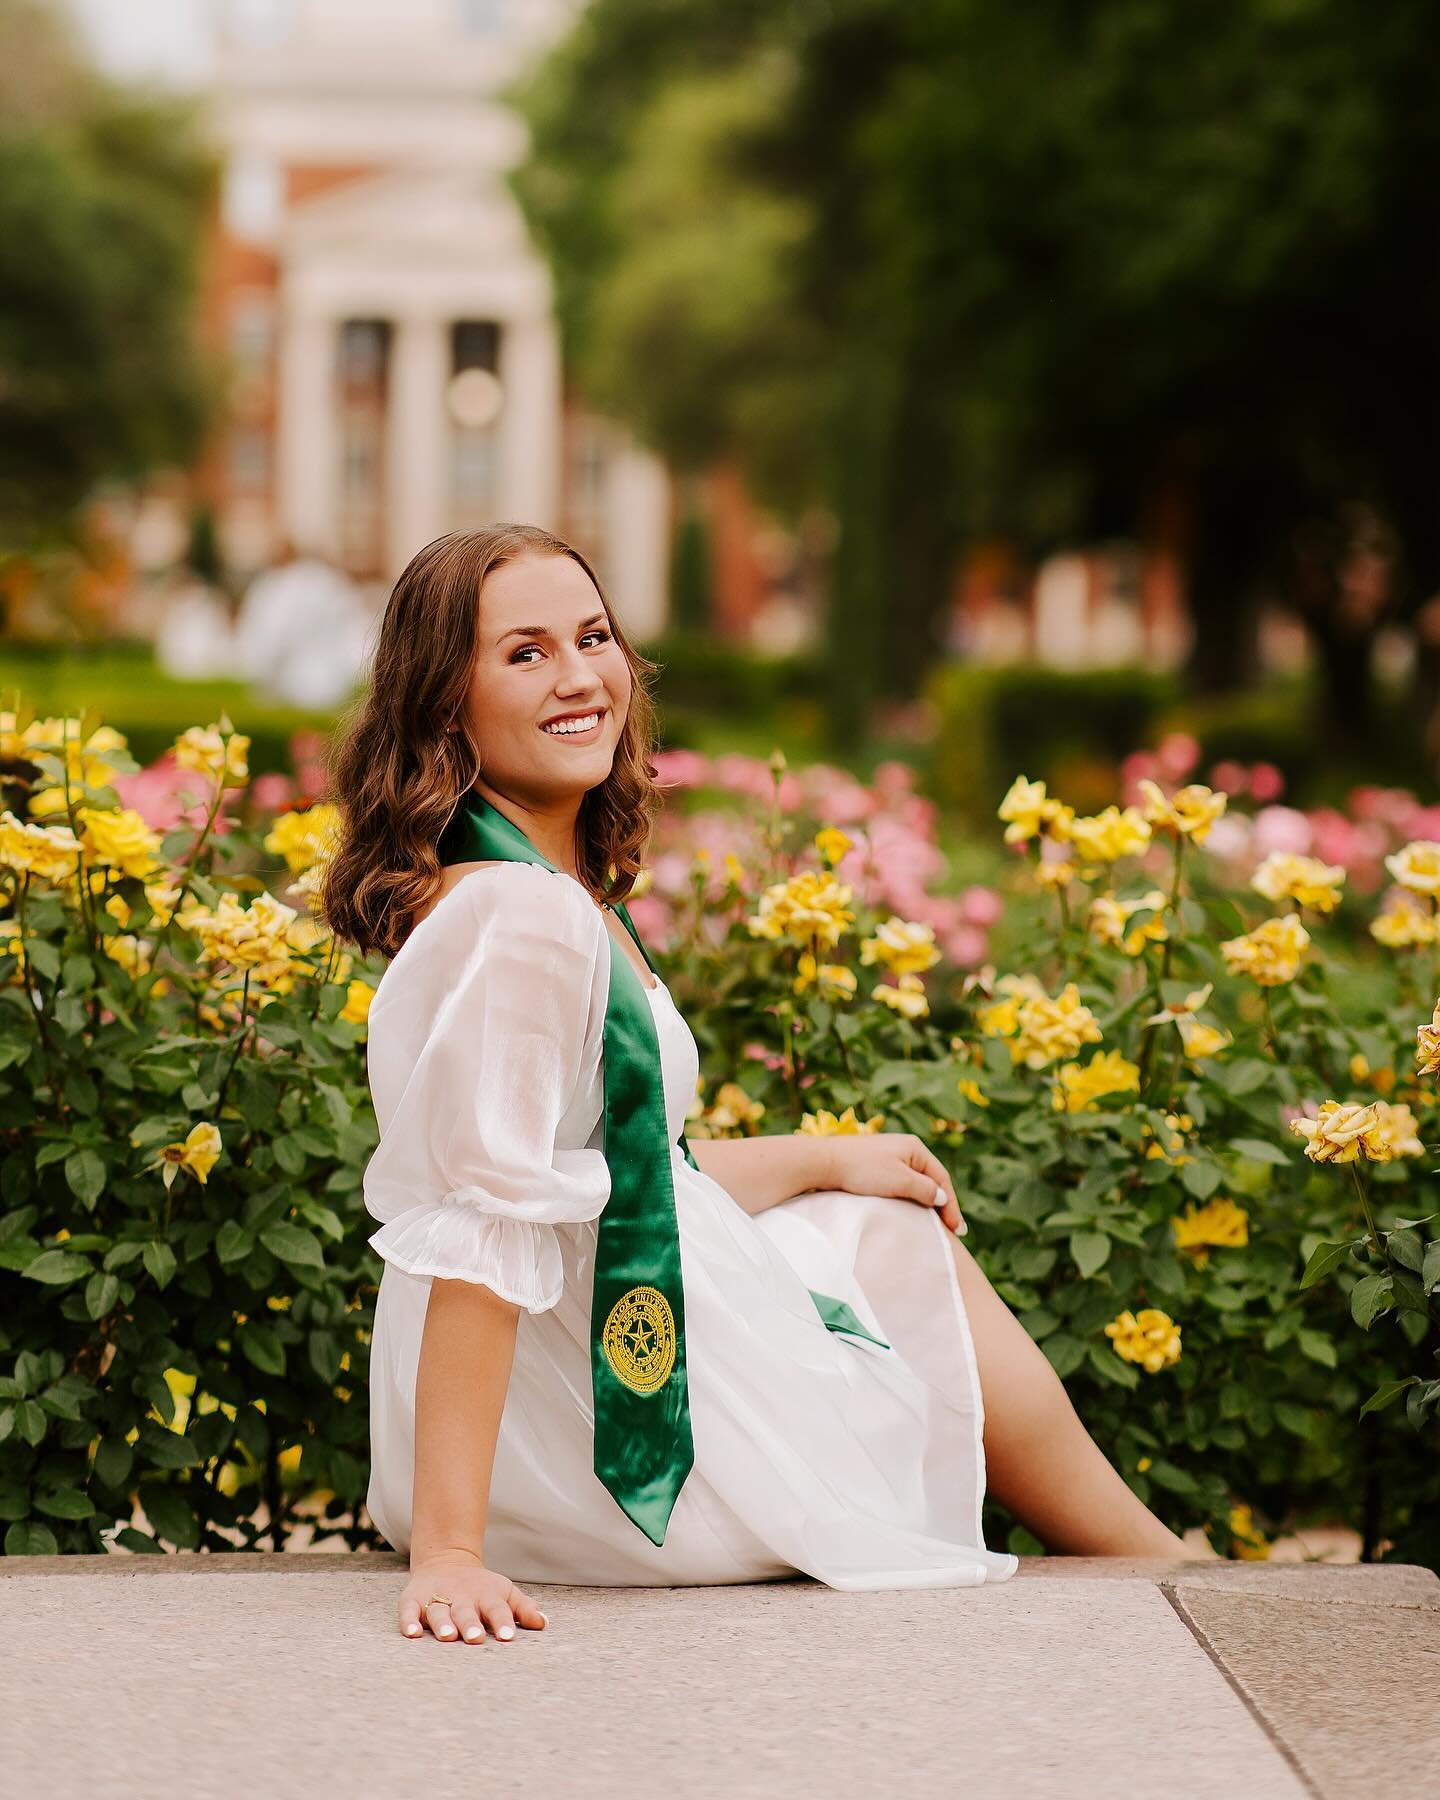 SNEAK PEEKS OF @calliehutyra 💚 the Baylor campus in the spring is just beautiful!! ☺️